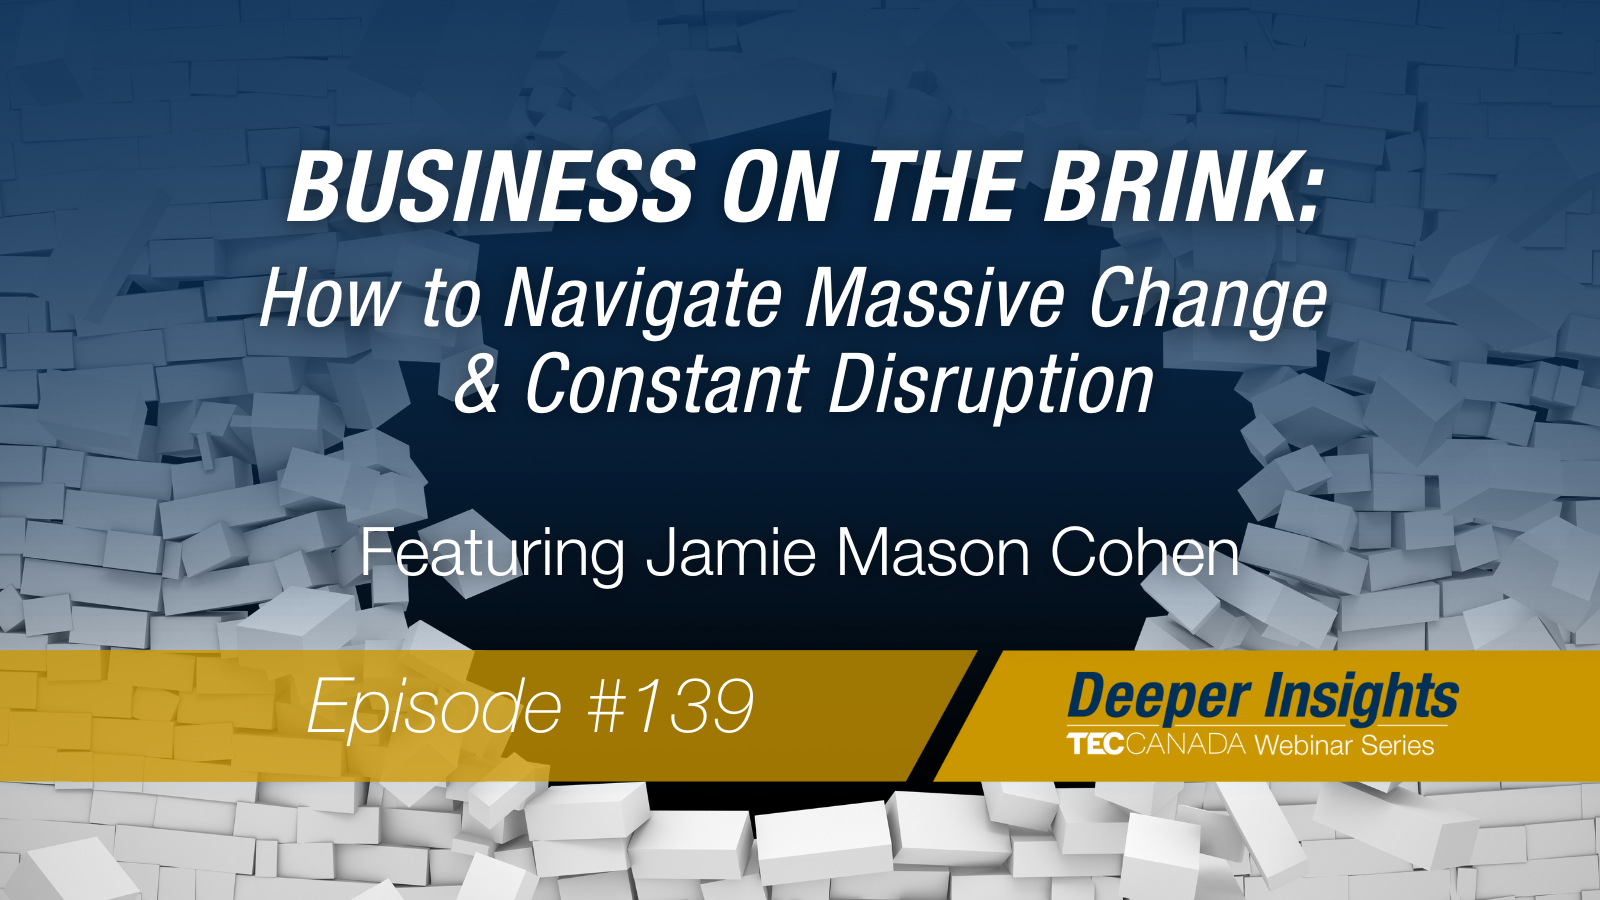 How to Navigate Massive Change and Constant Disruption: A Guide for Canadian Business Owners